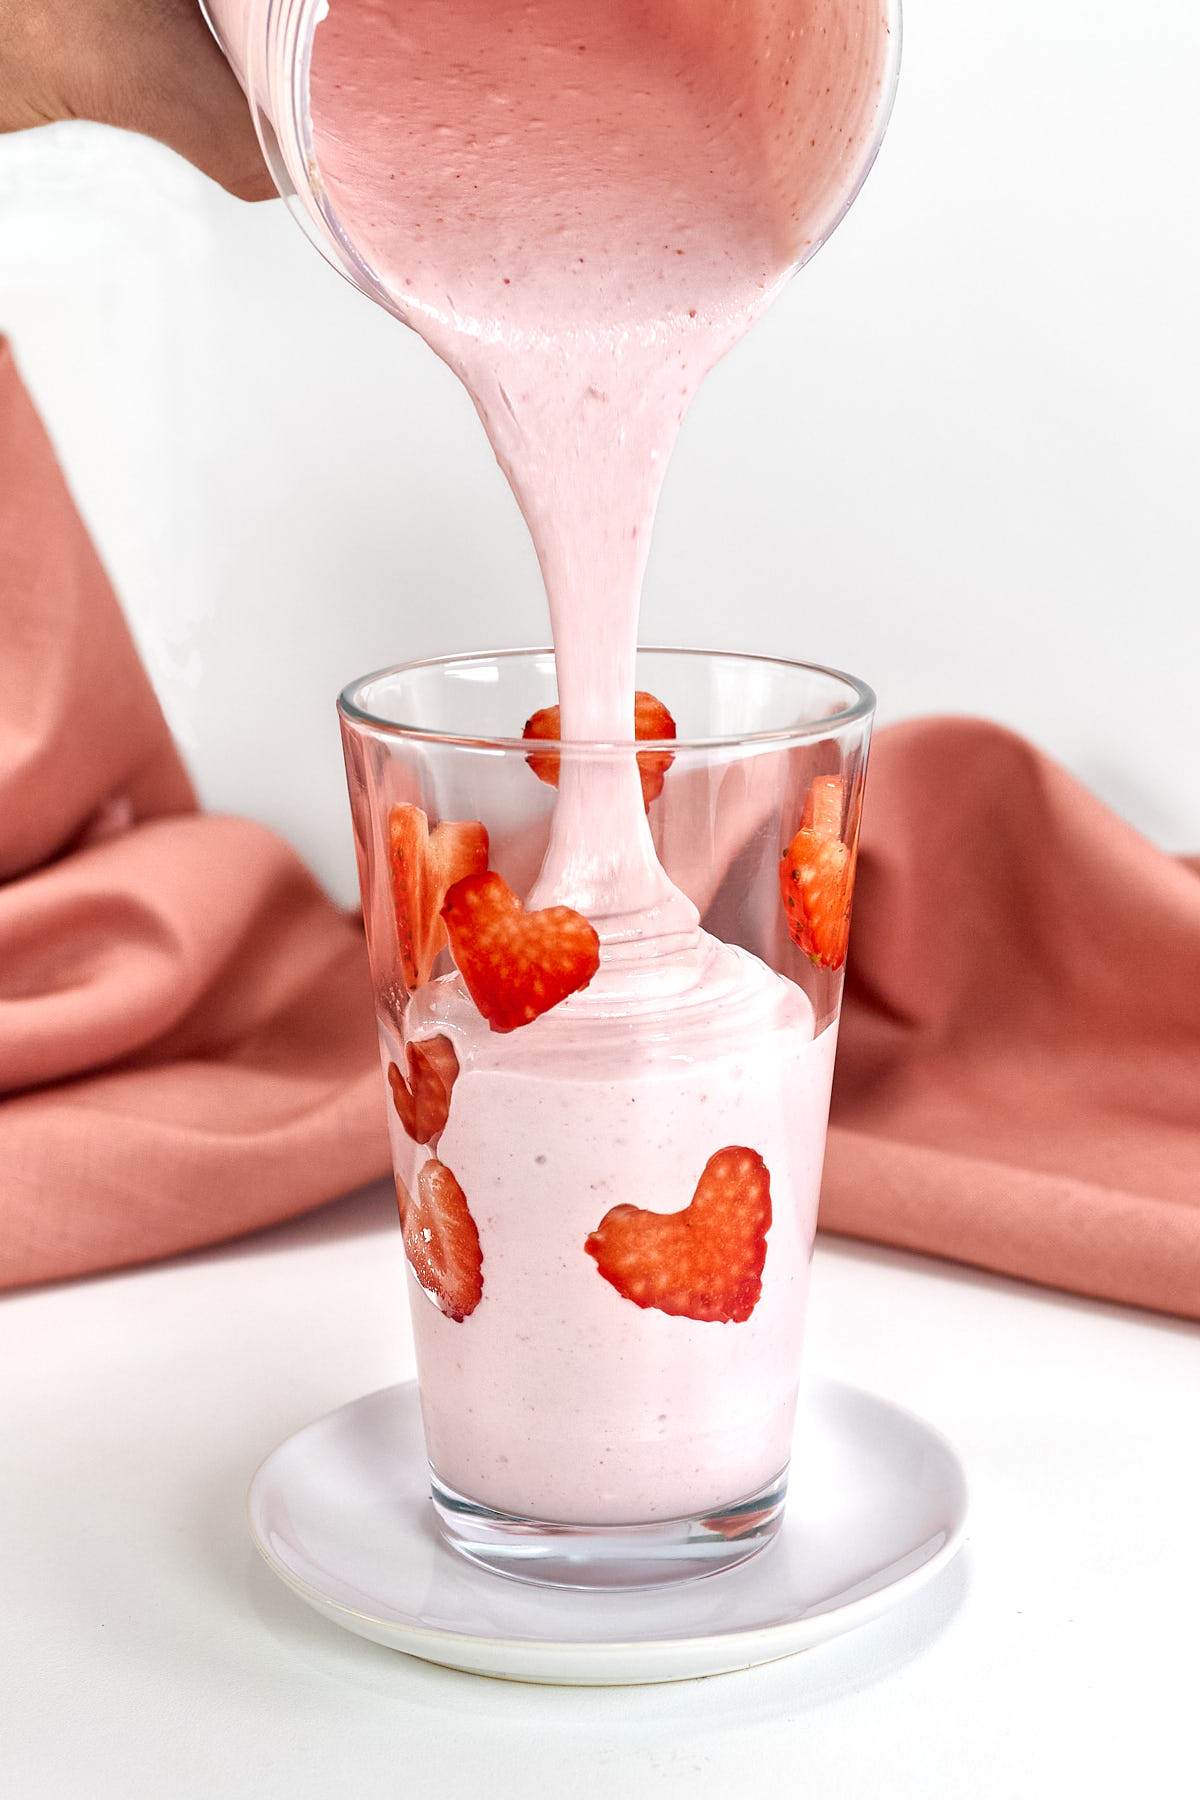 Pouring strawberry cottage cheese shake into glass.